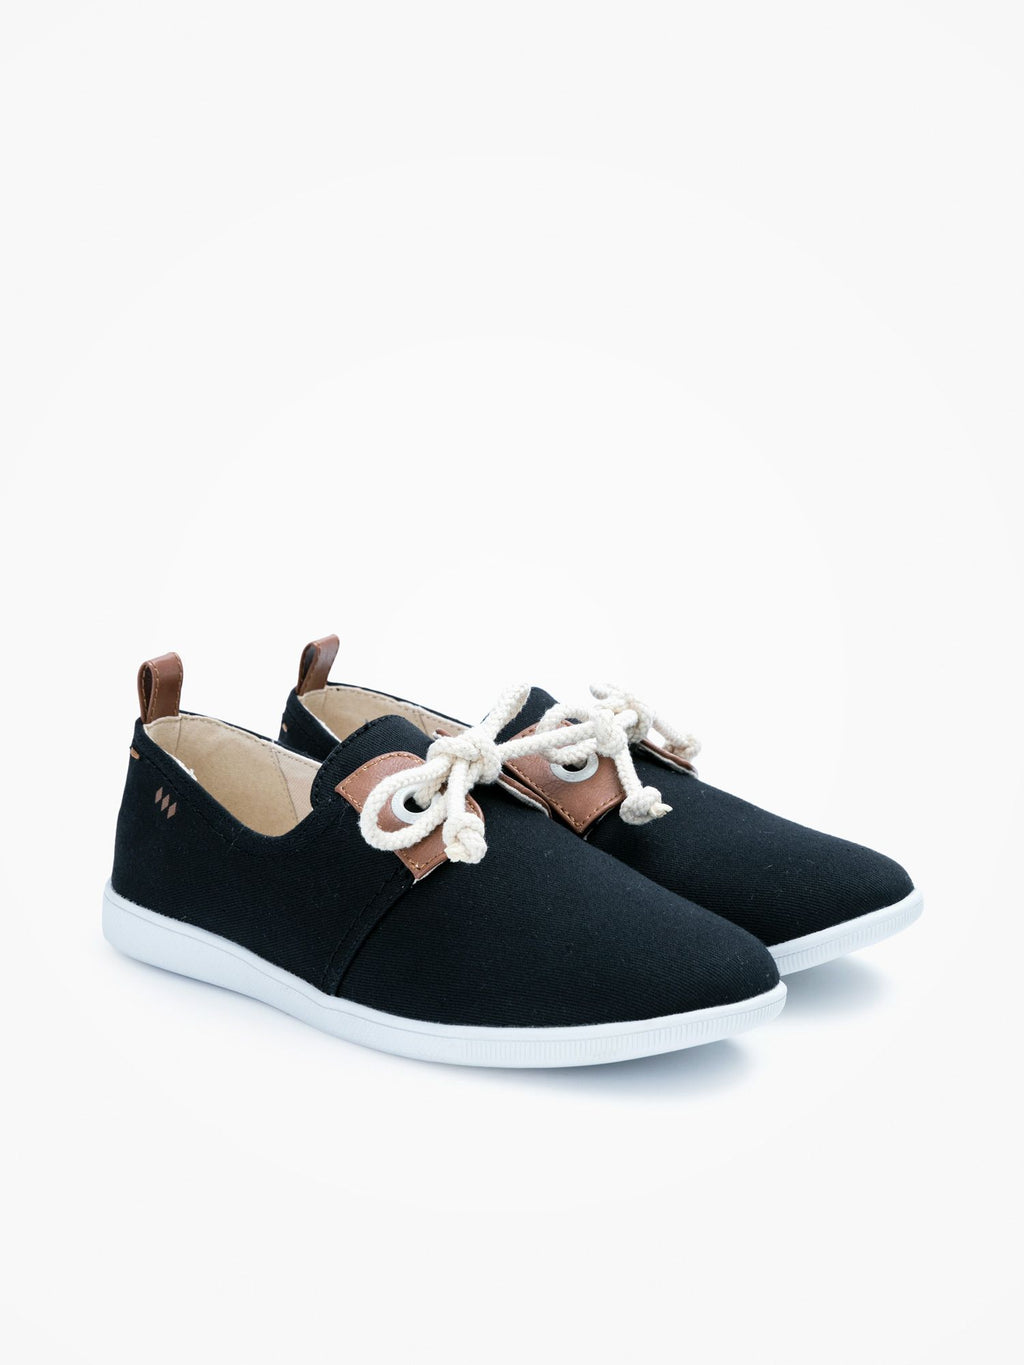 This minimalist black canvas sneaker is packed with neo-retro style and nautical inspiration with details such as oversized eyelets, leather yokes and marine-inspired cord laces.